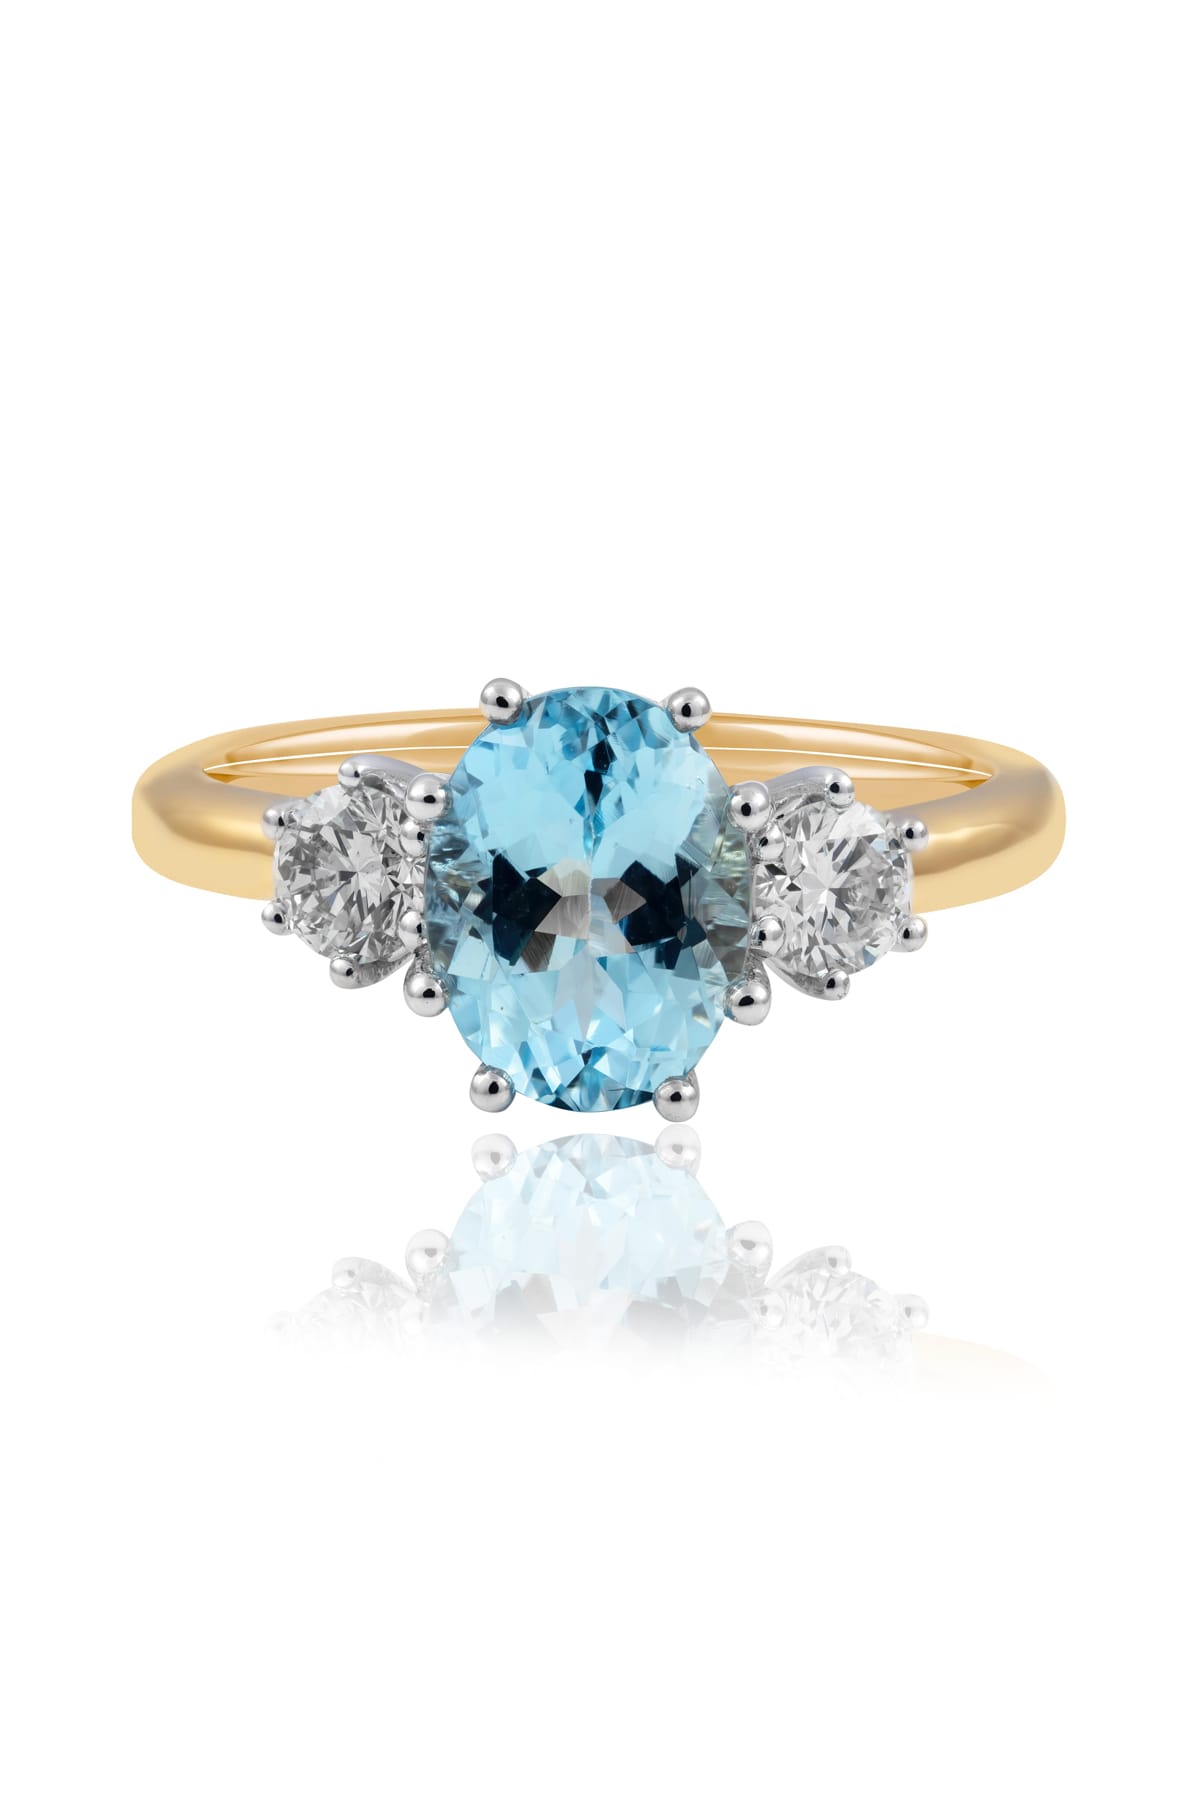 1.47ct Oval Aquamarine And Diamond 3-Stone Ring from LeGassick.